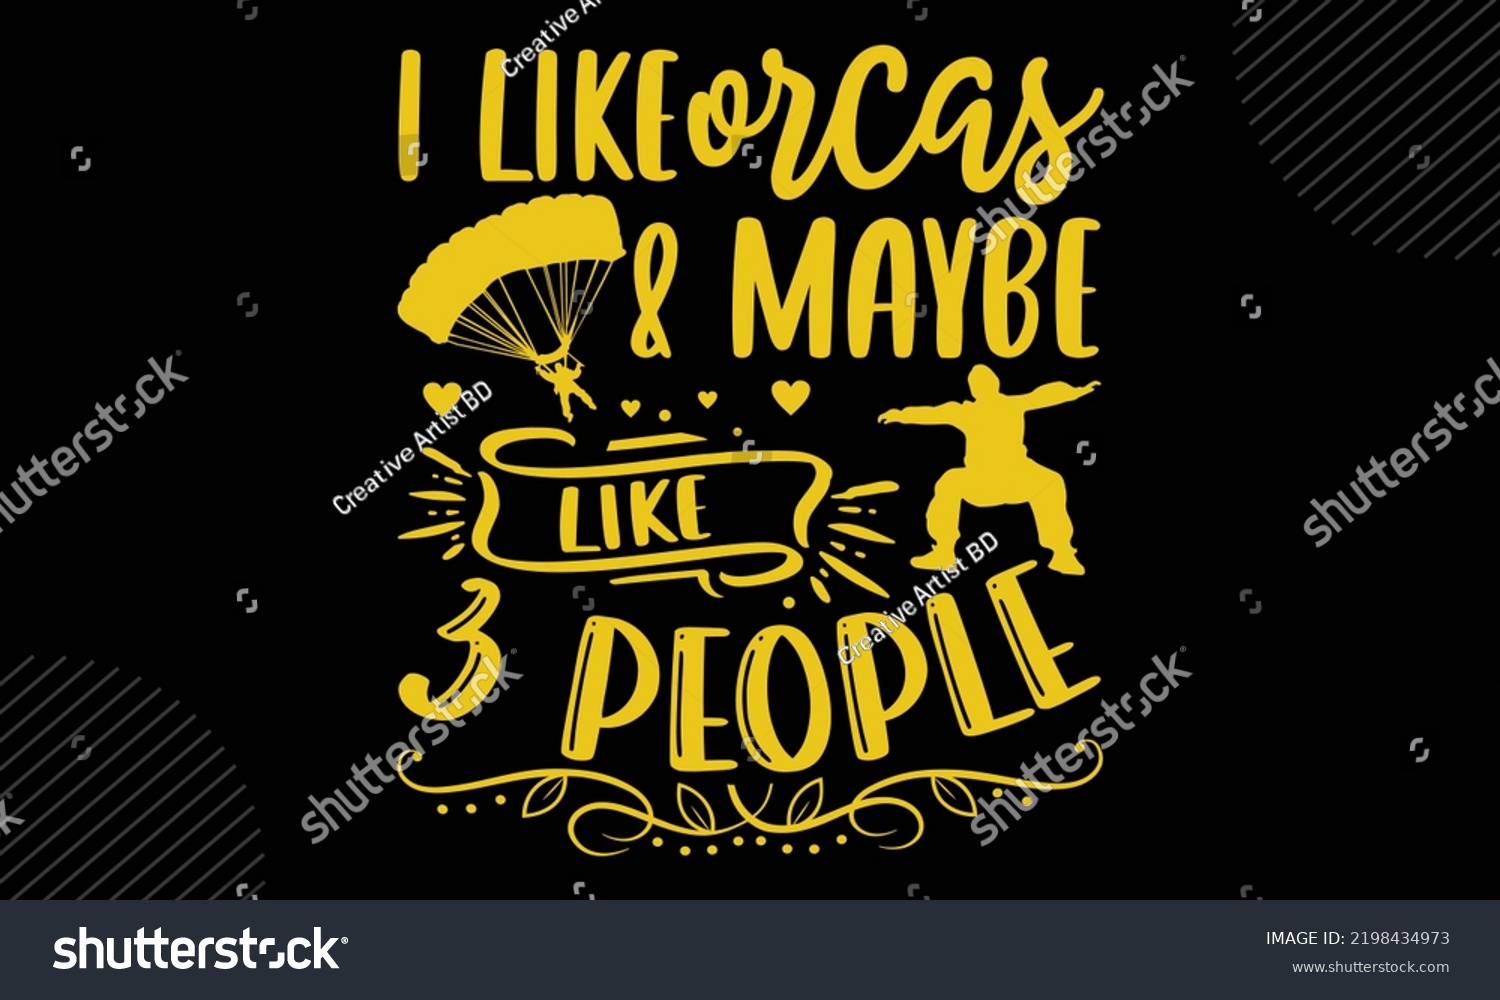 SVG of I Like Orcas And Maybe Like 3 People - Skydiving T shirt Design, Hand drawn vintage illustration with hand-lettering and decoration elements, Cut Files for Cricut Svg, Digital Download svg